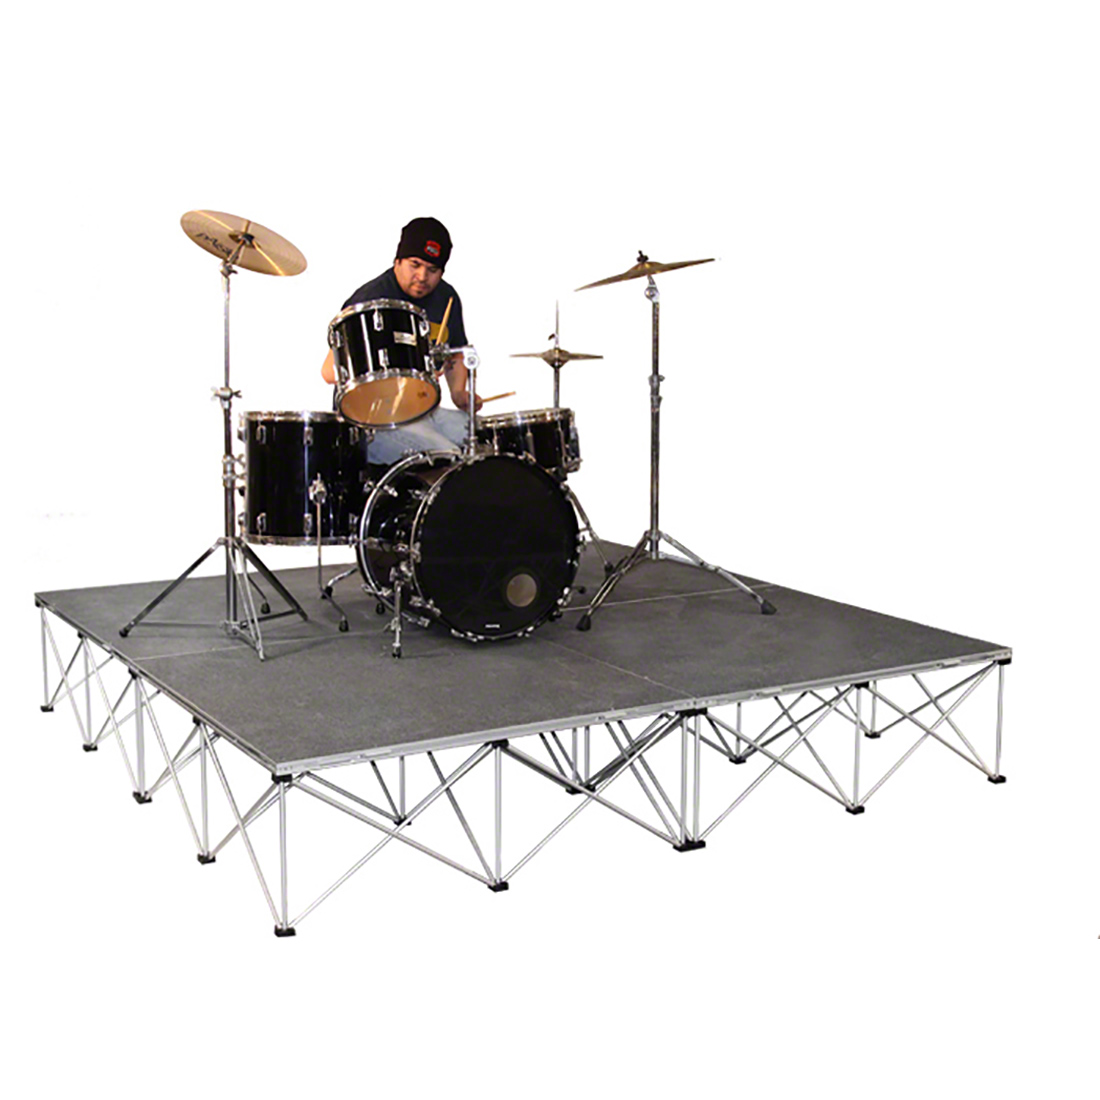 Intellistage Portable Stages Platforms And Risers